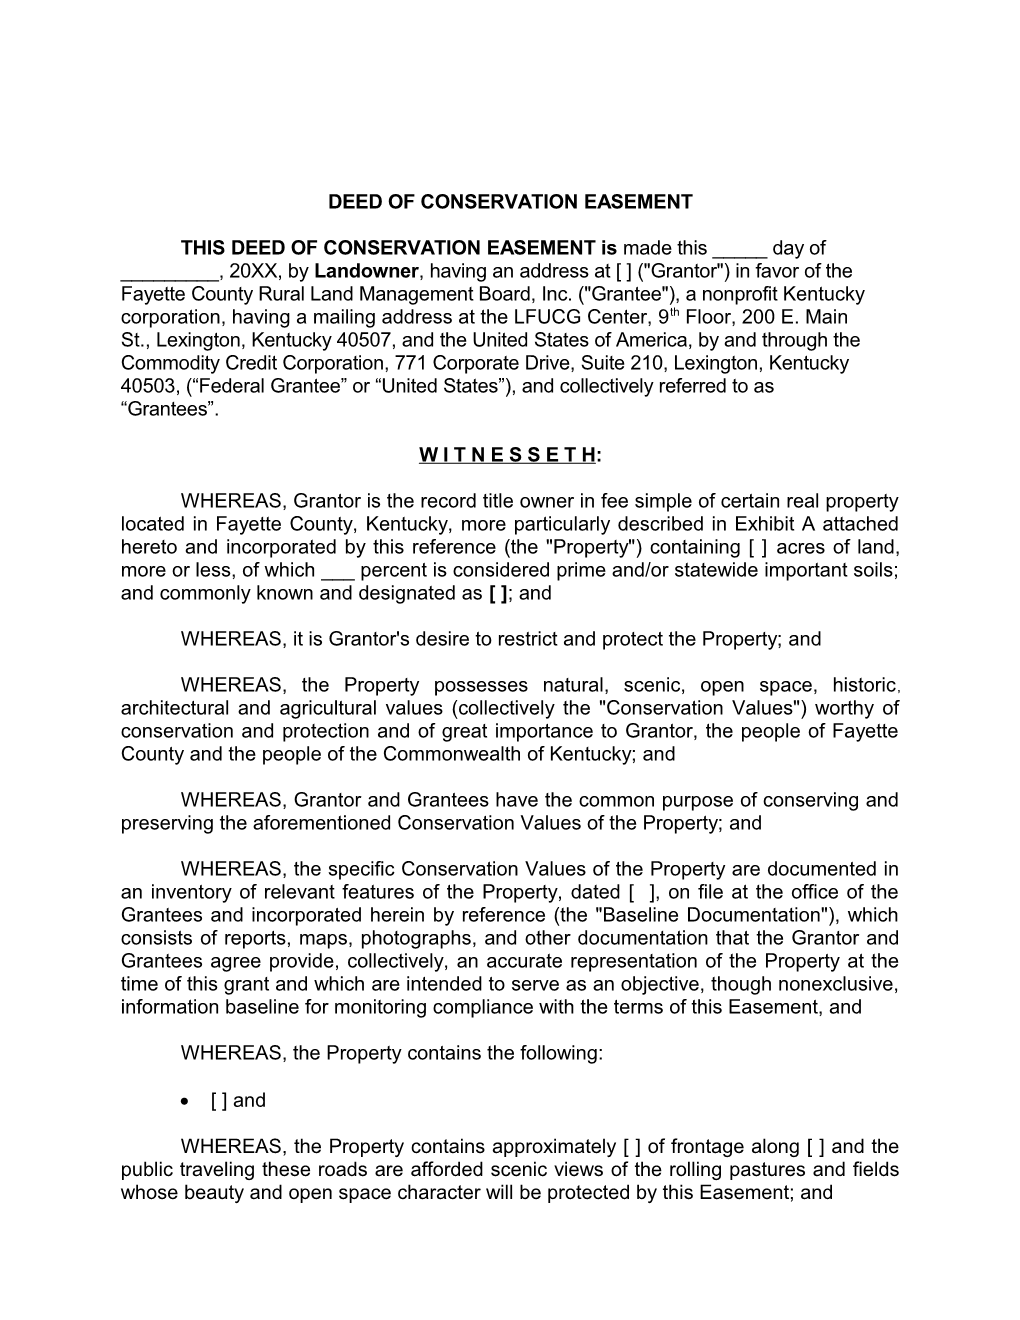 Deed of Conservation Easement s1